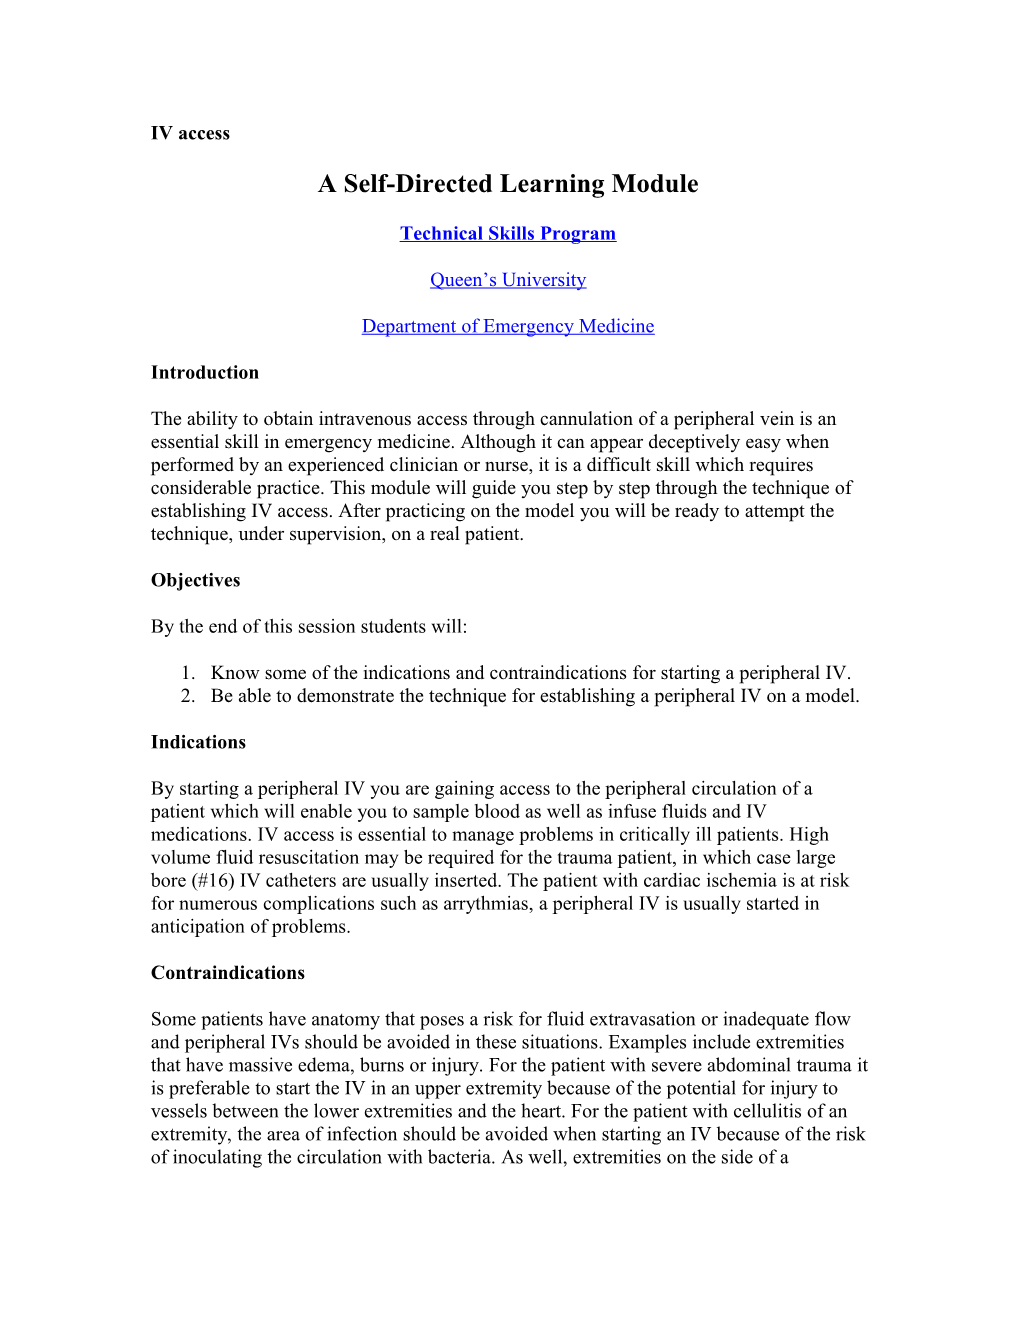 A Self-Directed Learning Module